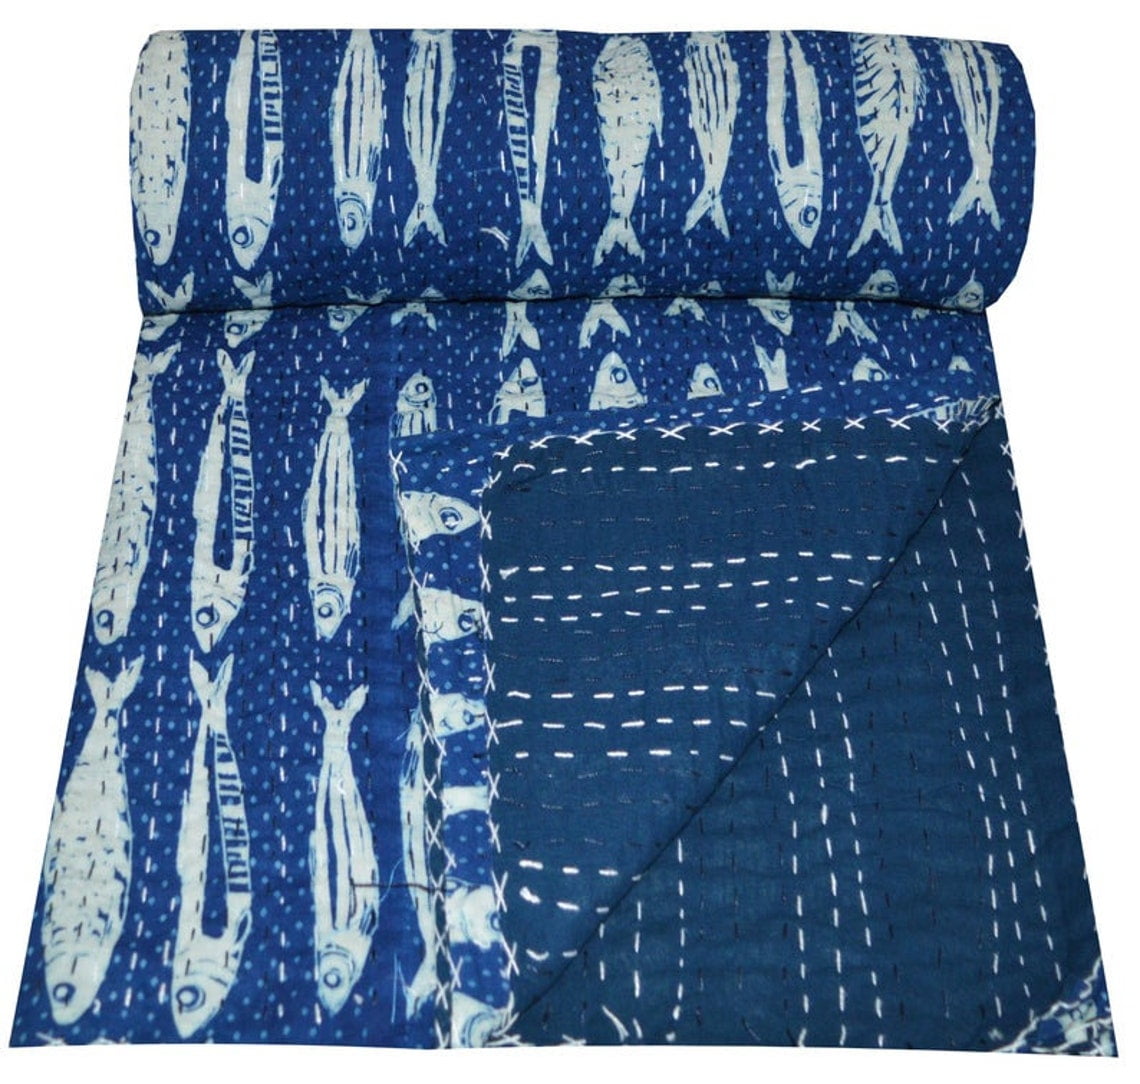 Details about   Handblock Kantha Quilt King Size Bedspread Indian Tree Of Life Gudari Blue Throw 